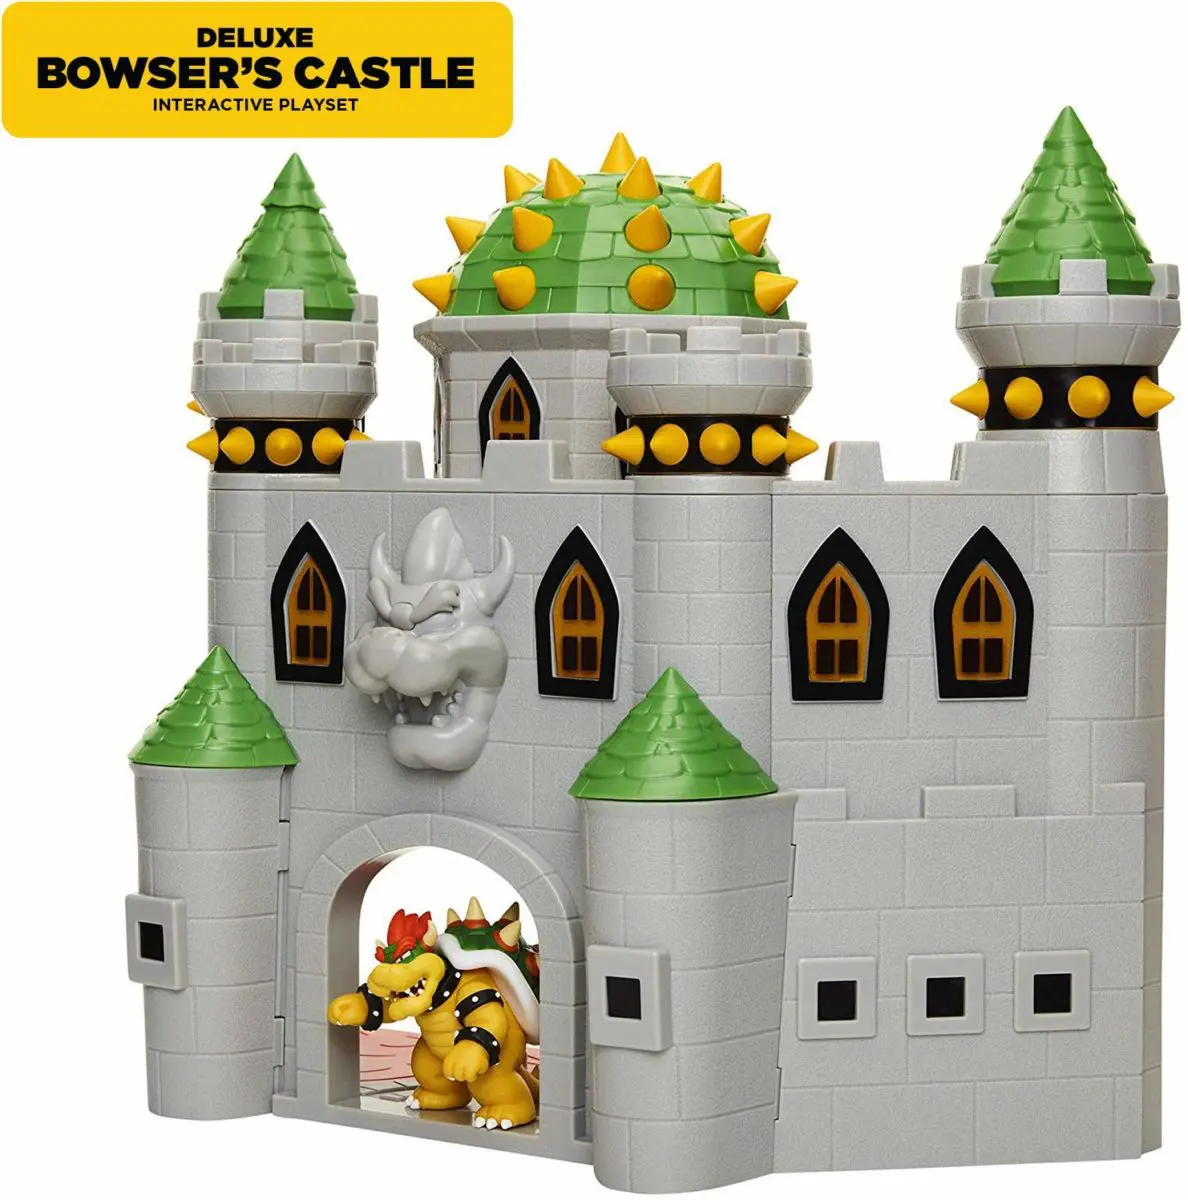 Nintindo Super Mario Deluxe Bowser’s Castle Playset - Top Toys and Gifts for Five Year Old Boys 1